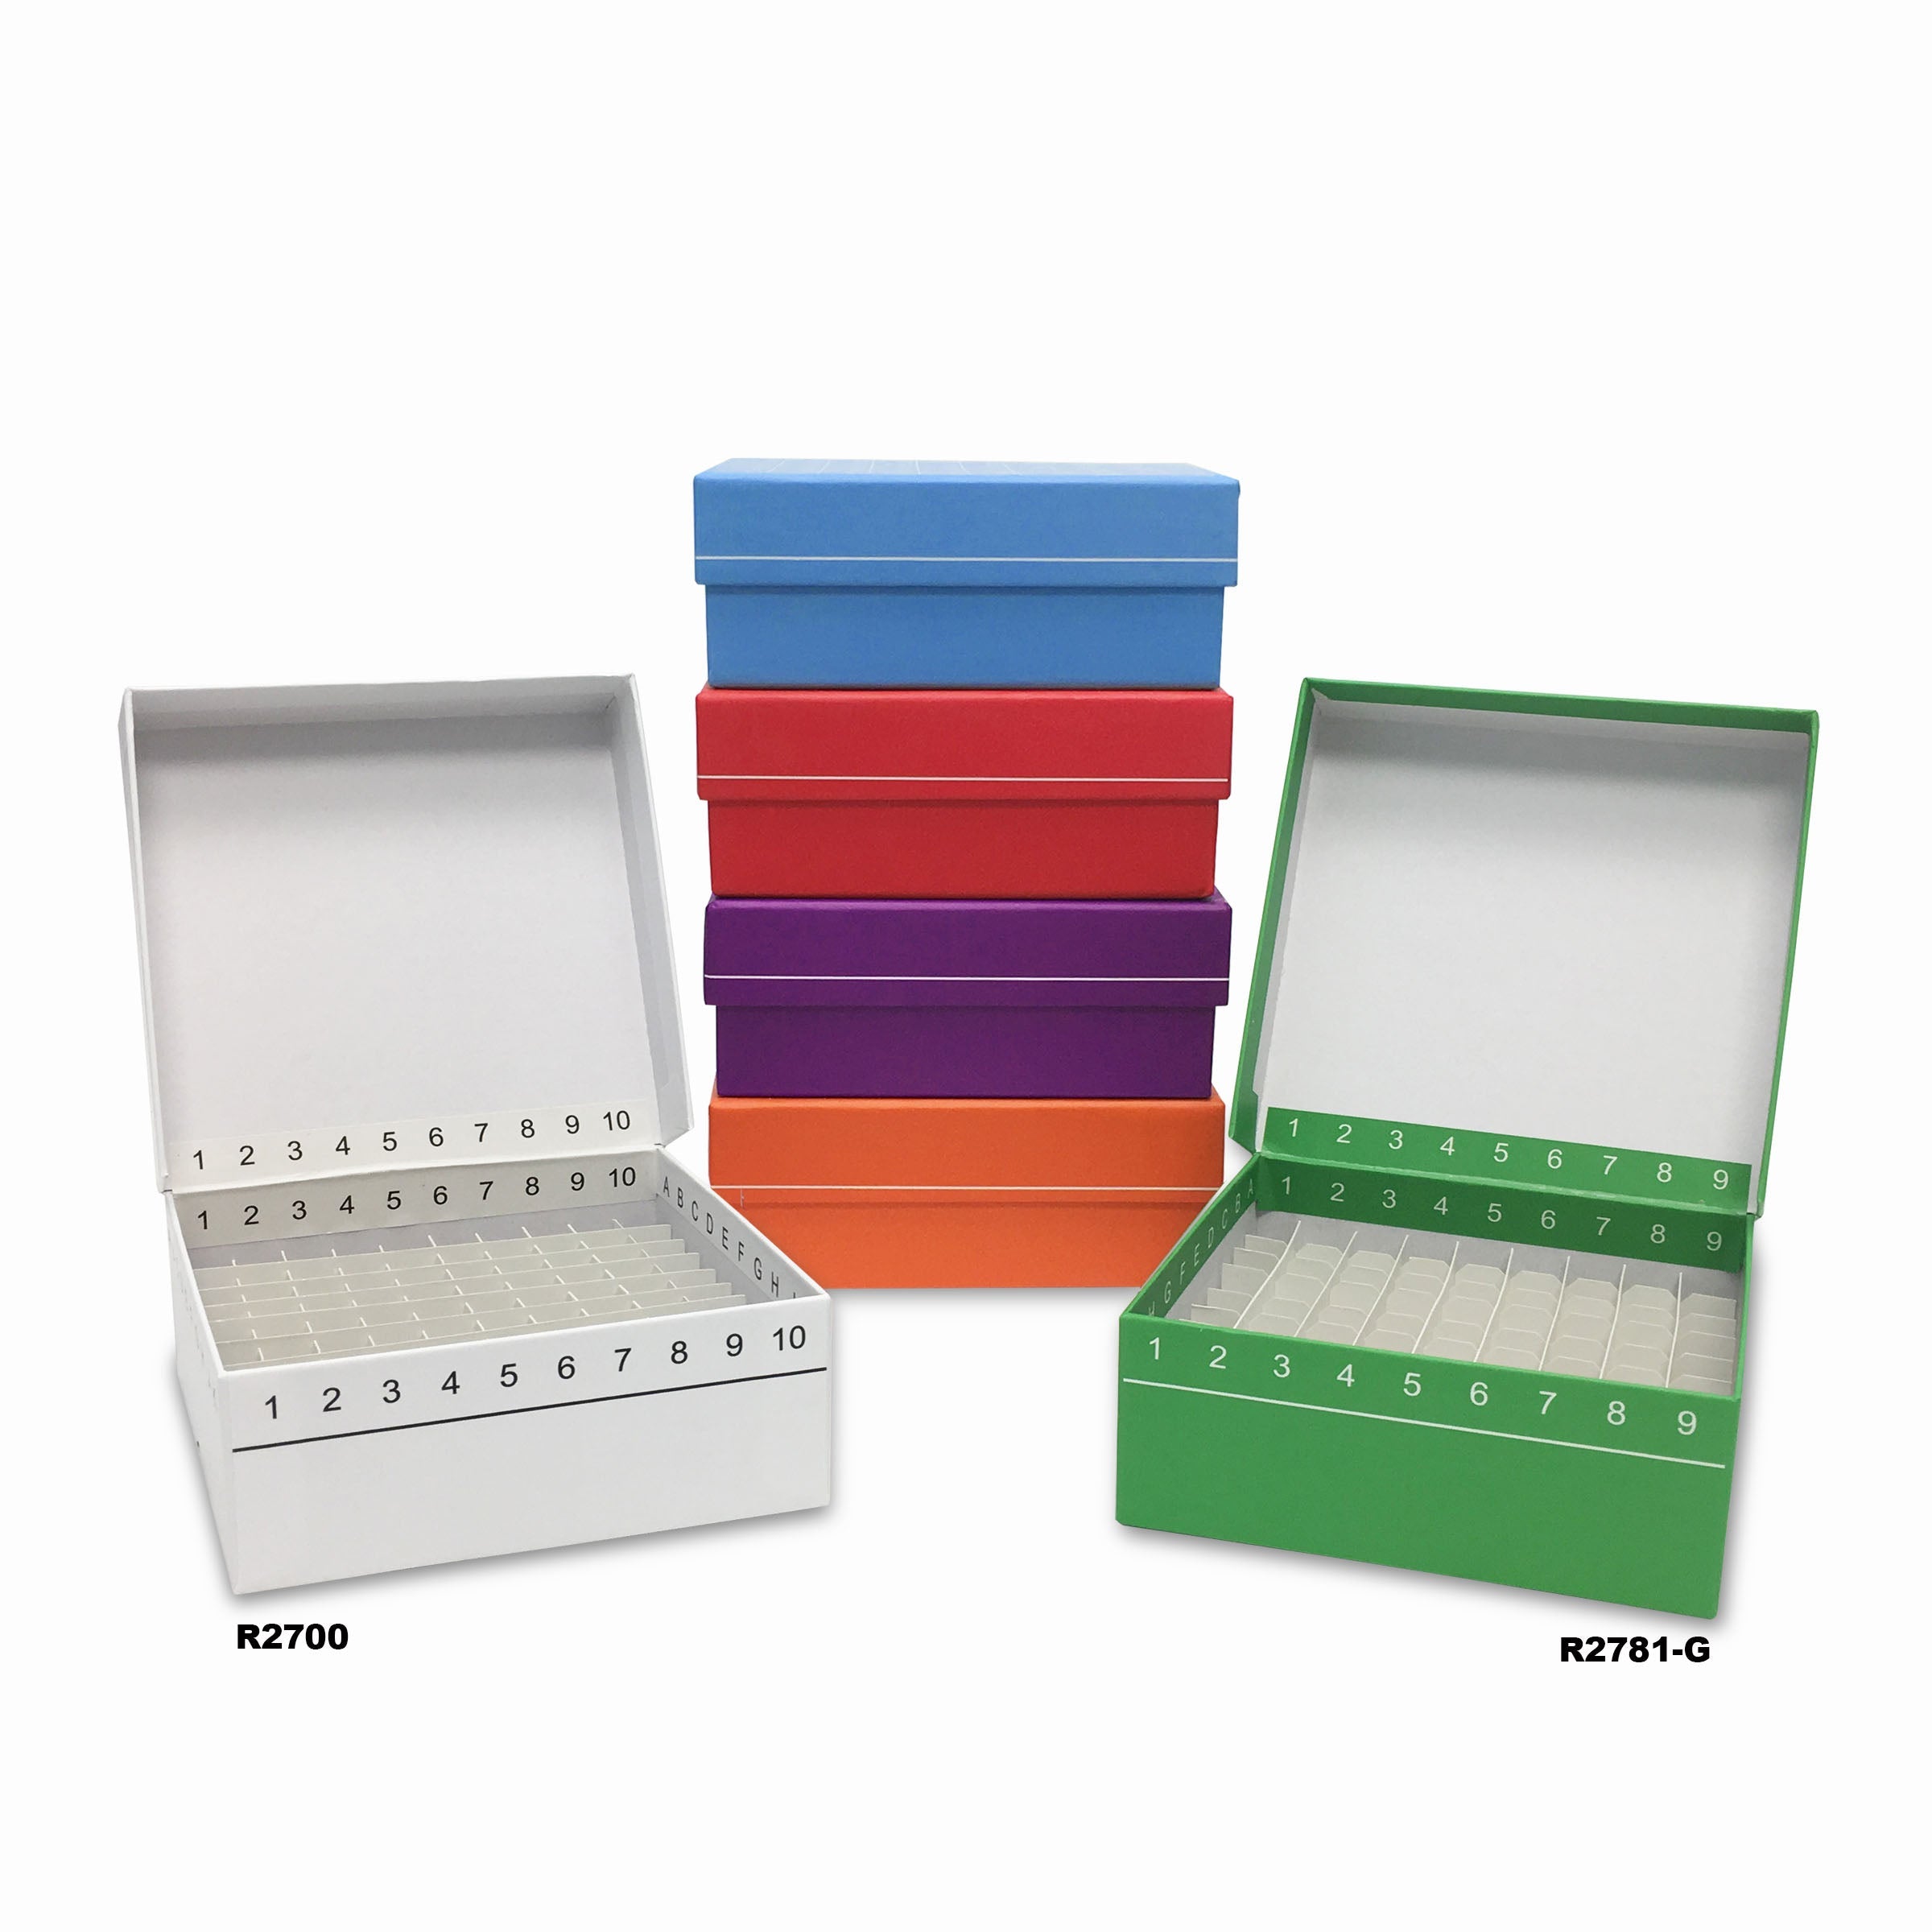 MTC Bio R2781-A, Fliptop Carboard Freezer Box with Attached Hinged Lid, 81-Place, Assorted Colors, 5/pk